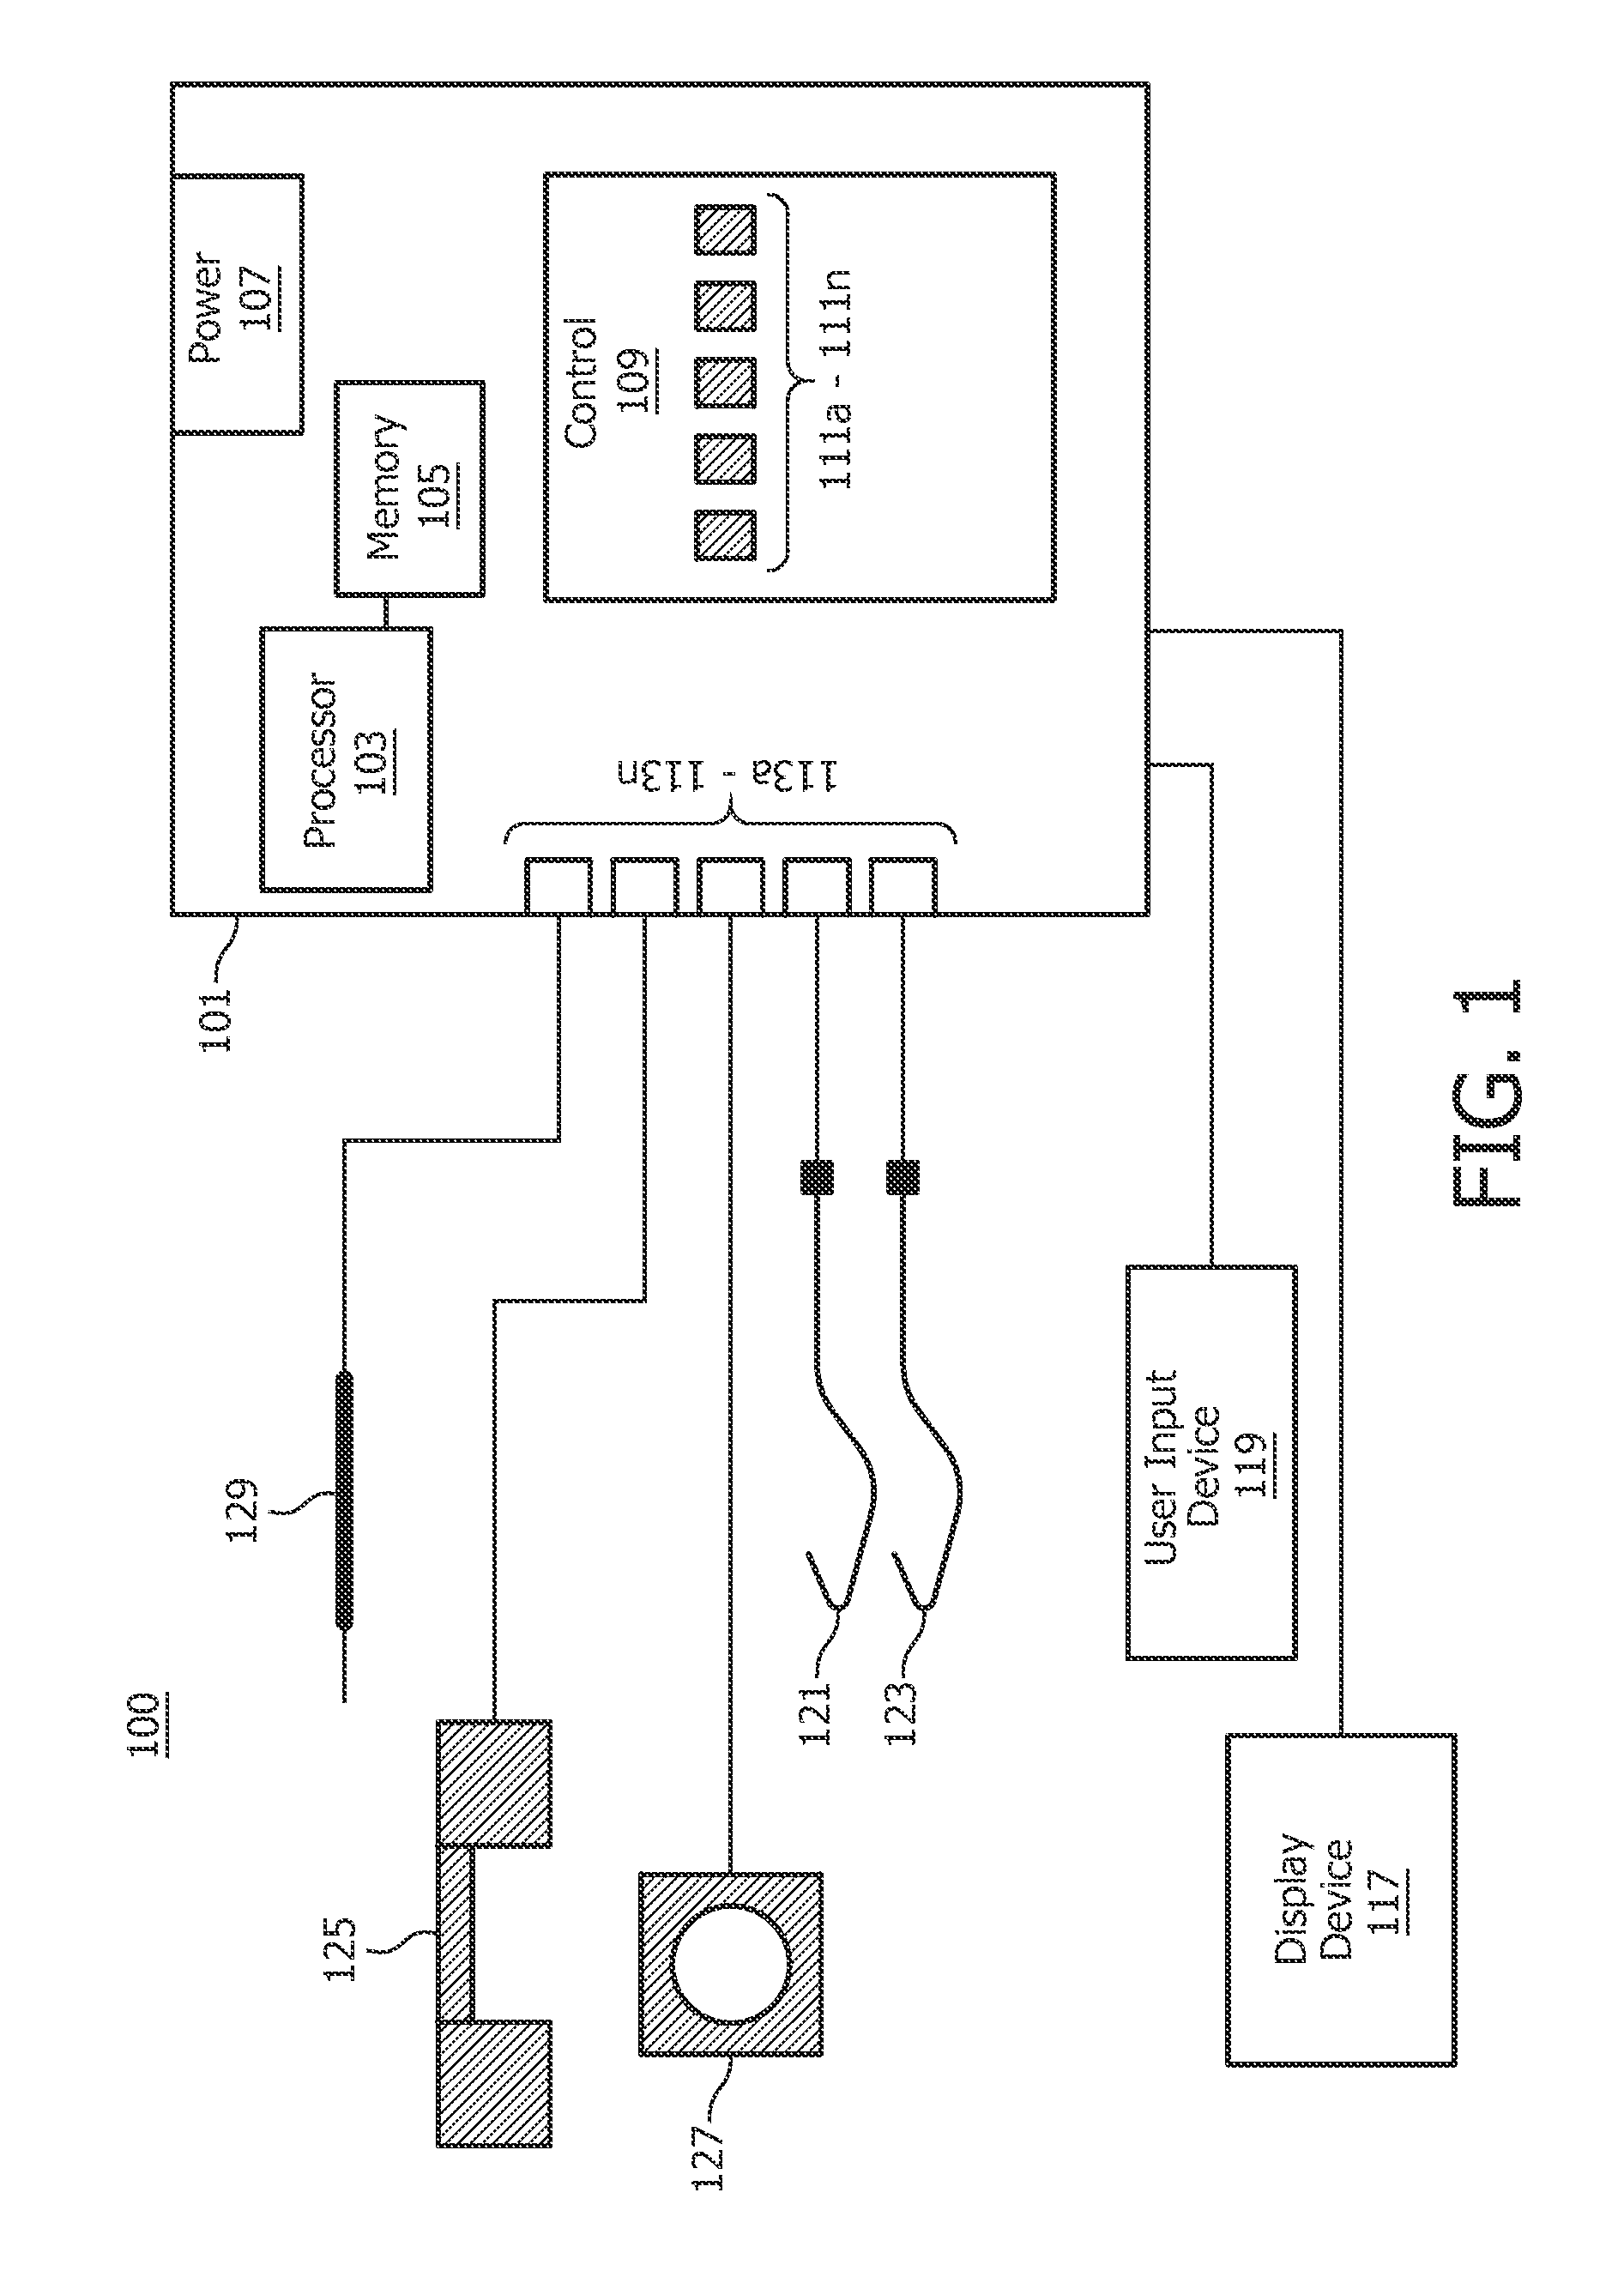 System, methods, and instrumentation for image guided prostate treatment